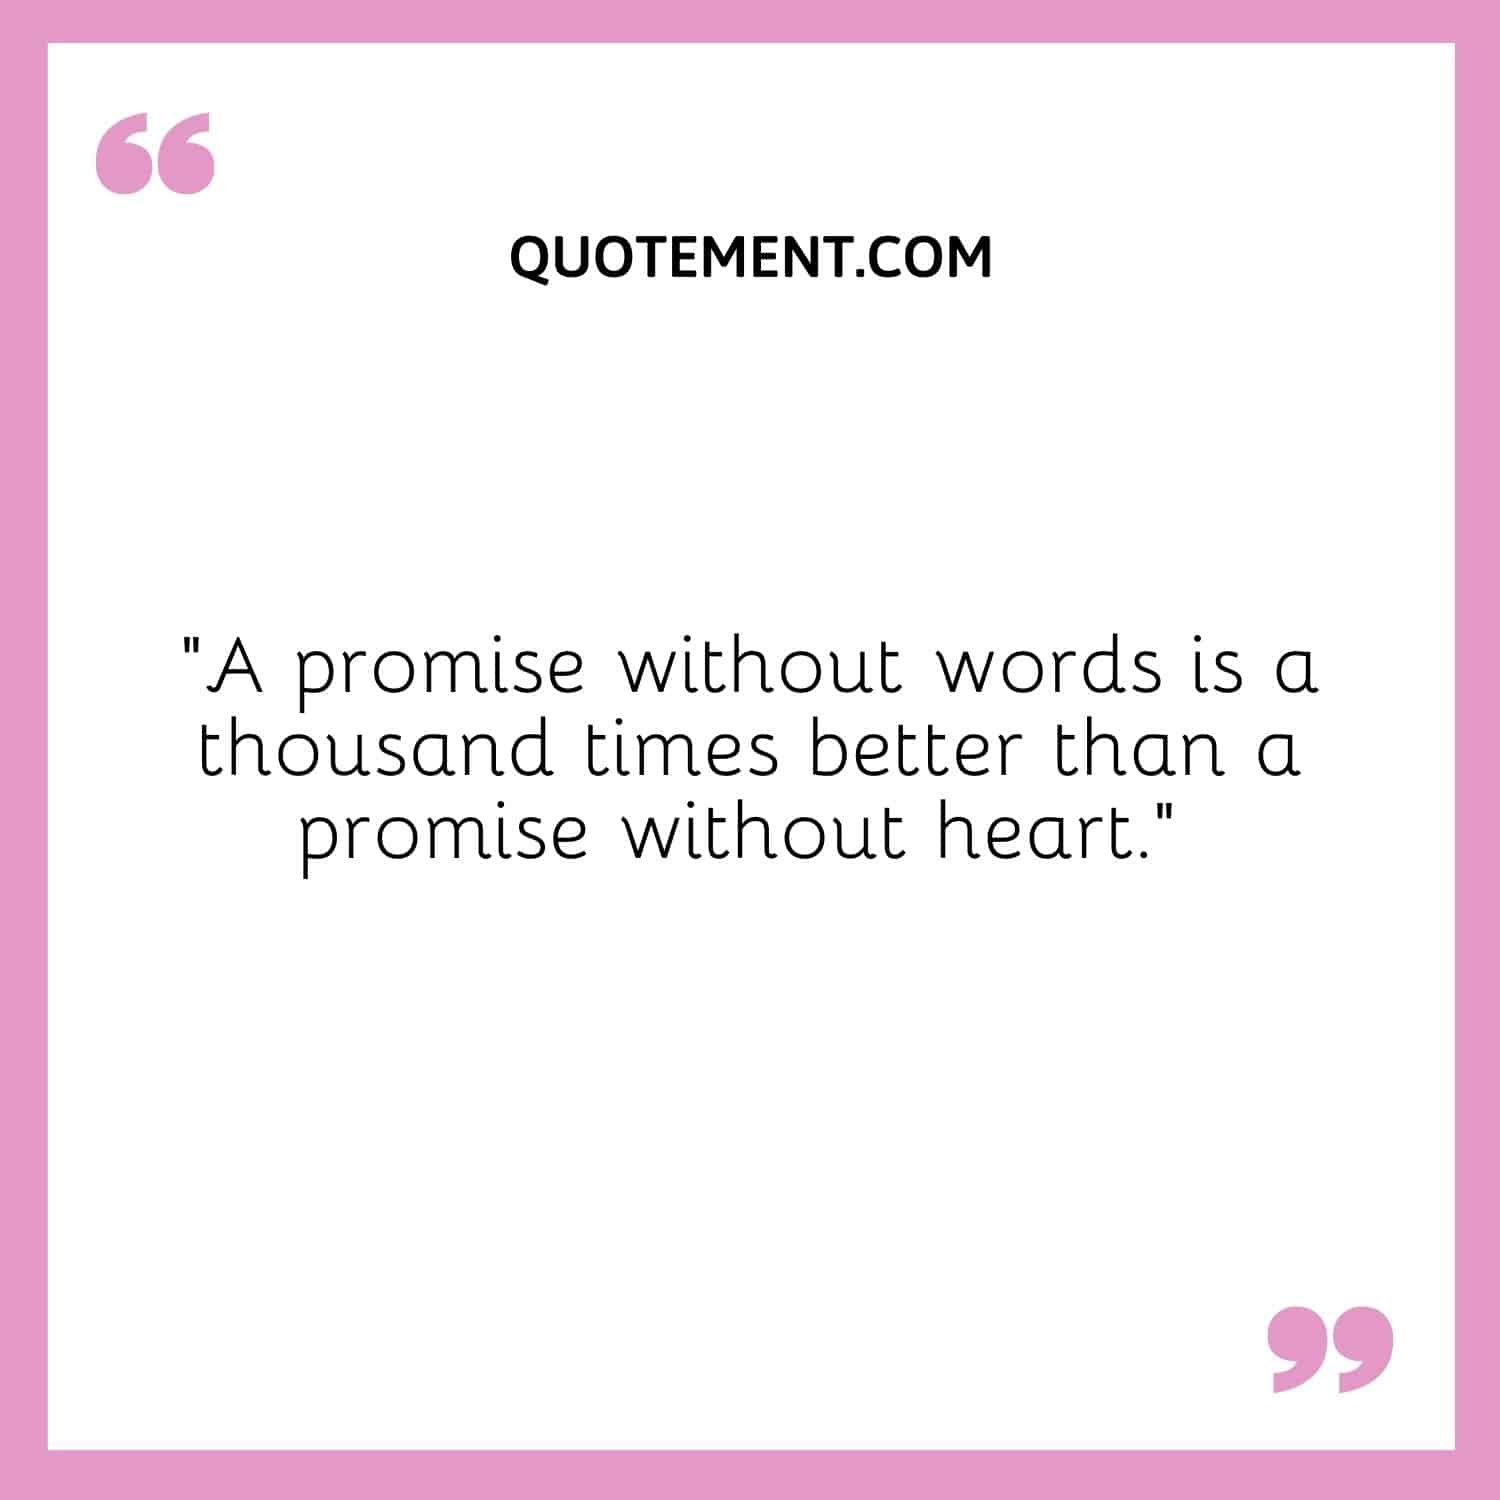 “A promise without words is a thousand times better than a promise without heart.”